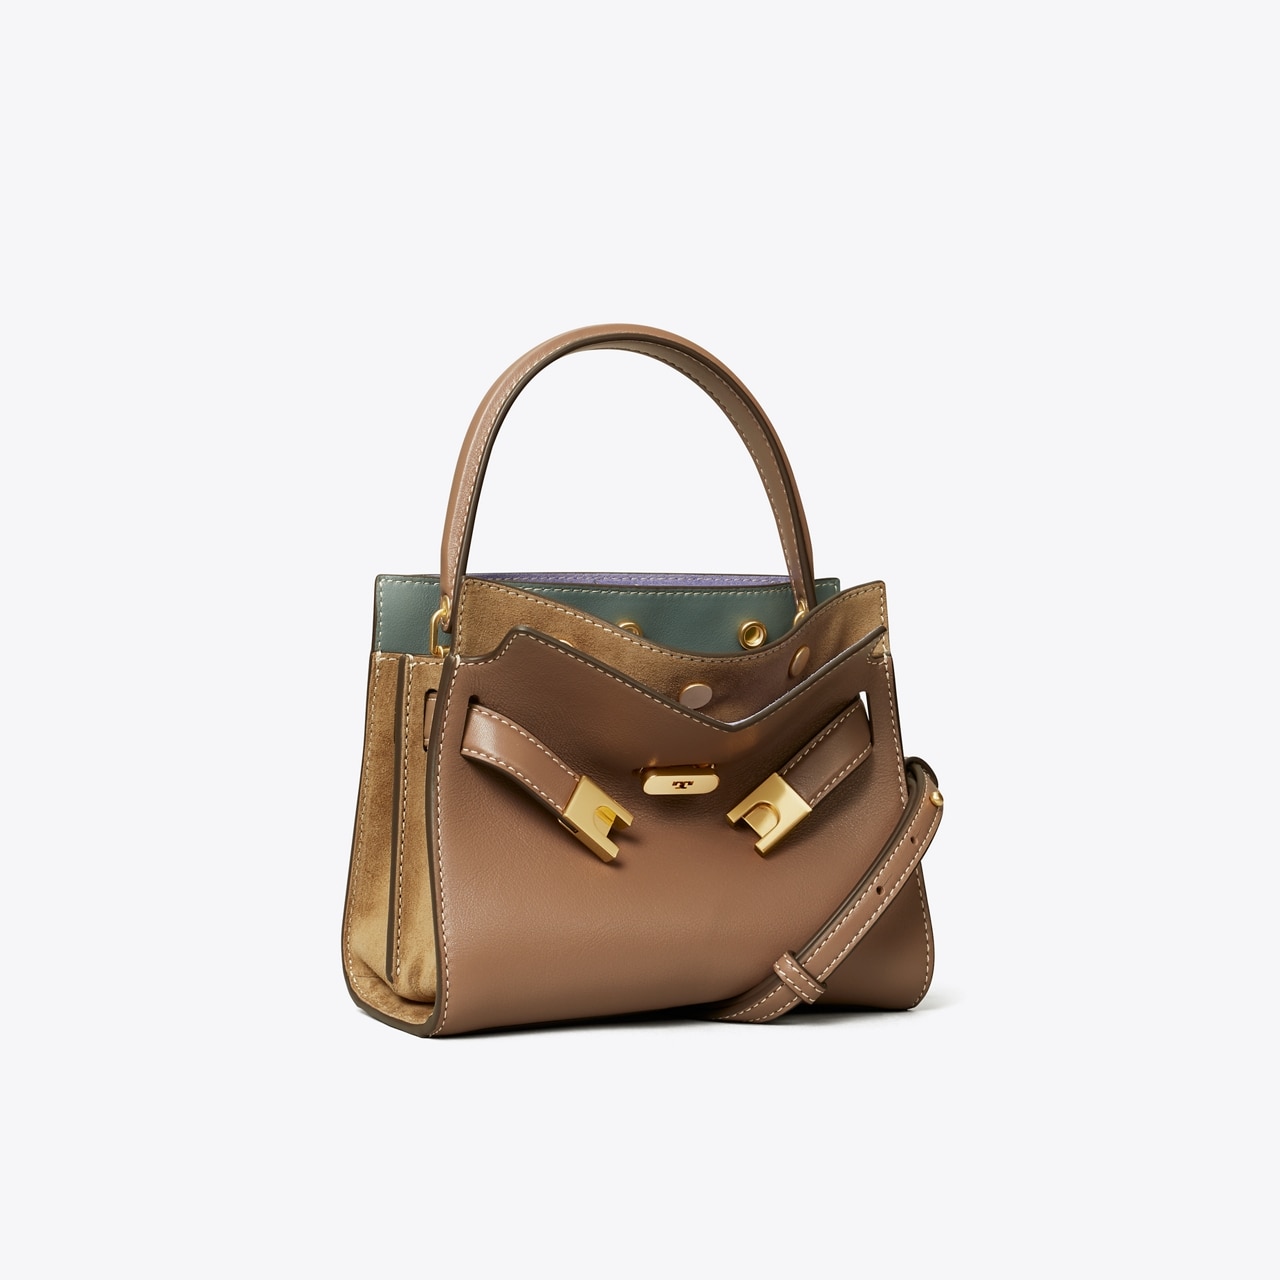 Tory Burch - Our Lee Radziwill Petite Bag Shop now